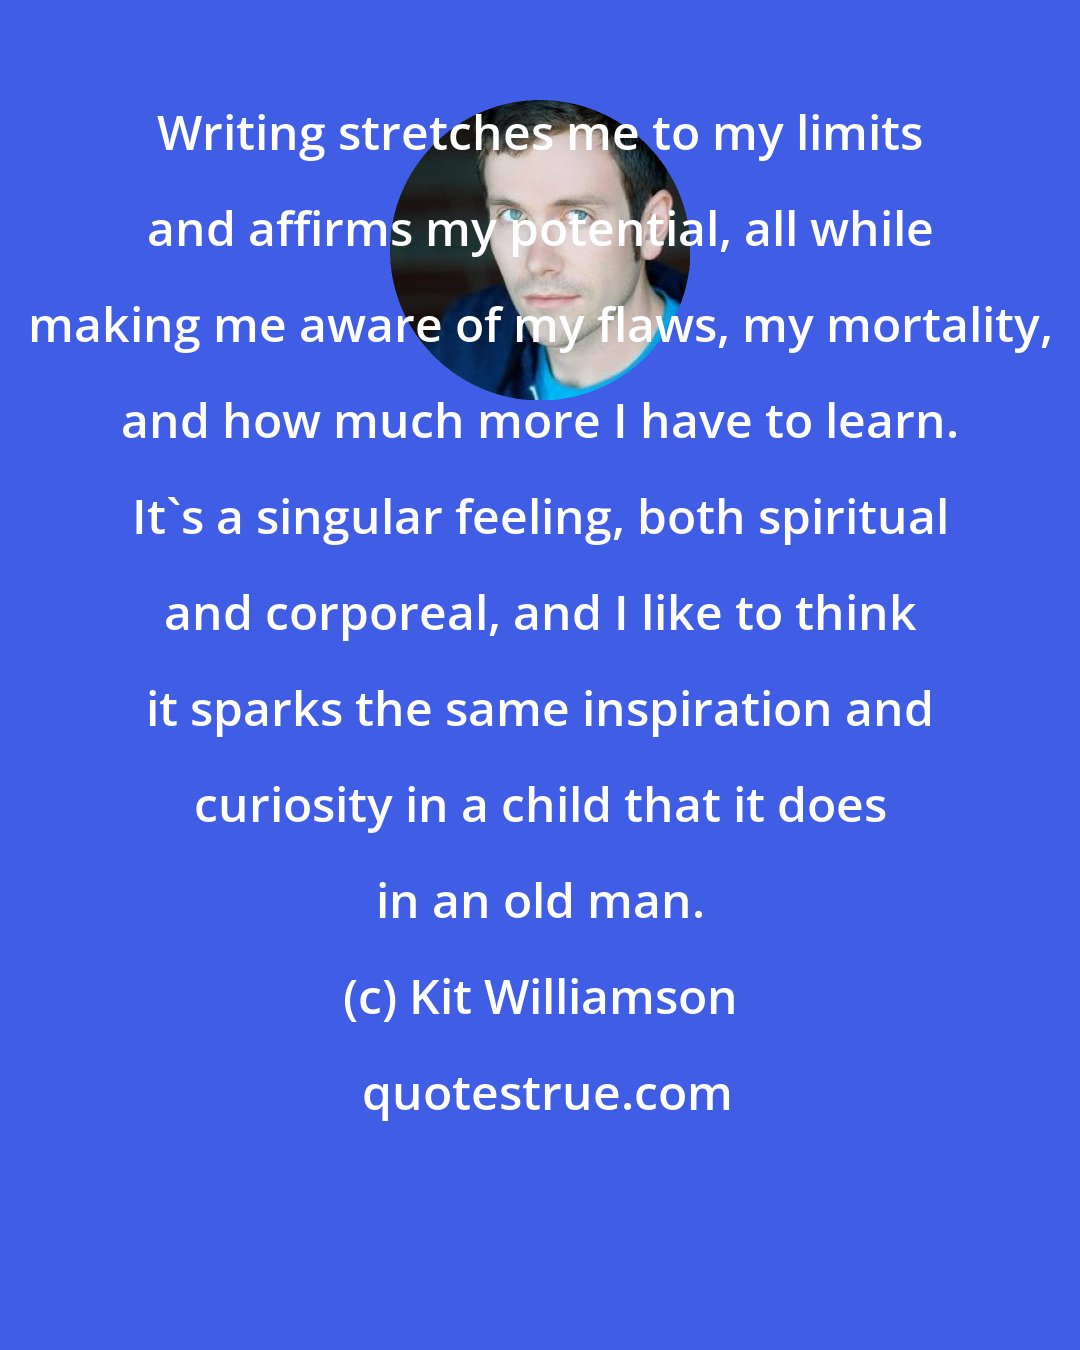 Kit Williamson: Writing stretches me to my limits and affirms my potential, all while making me aware of my flaws, my mortality, and how much more I have to learn. It's a singular feeling, both spiritual and corporeal, and I like to think it sparks the same inspiration and curiosity in a child that it does in an old man.